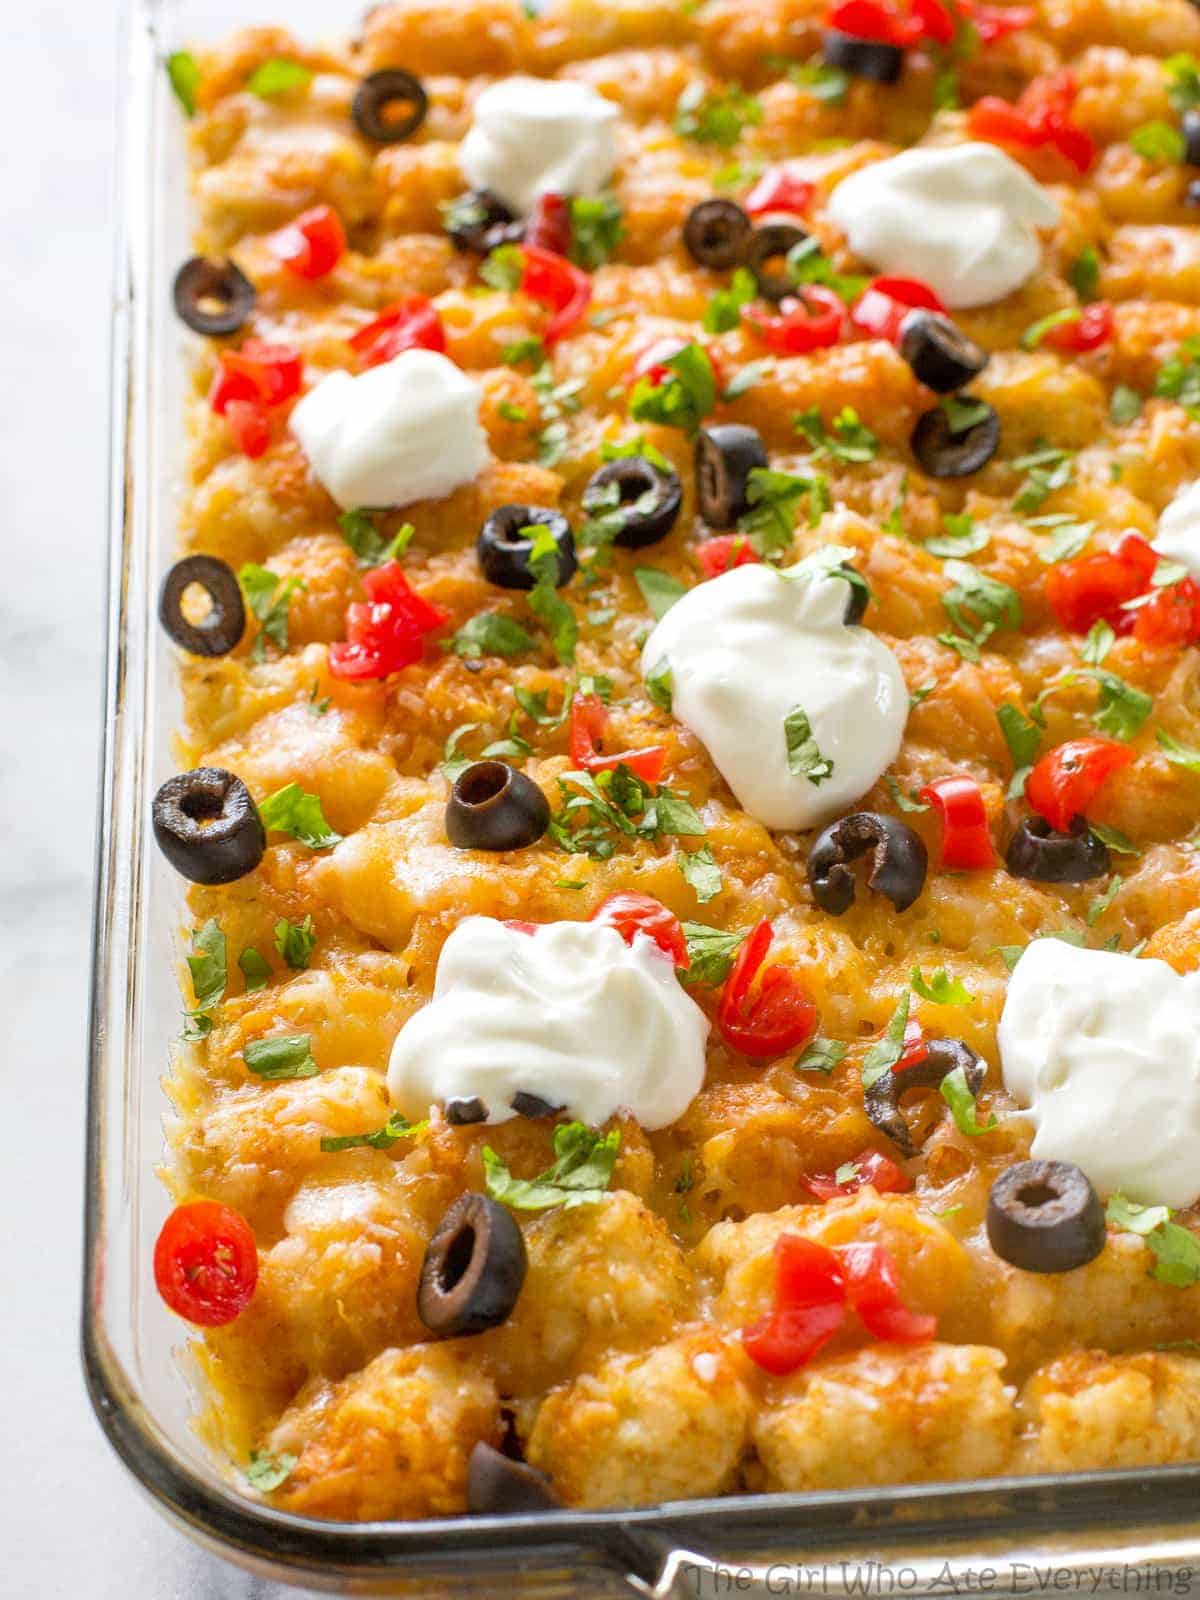 Tater Tot Casserole Recipe (with Video)